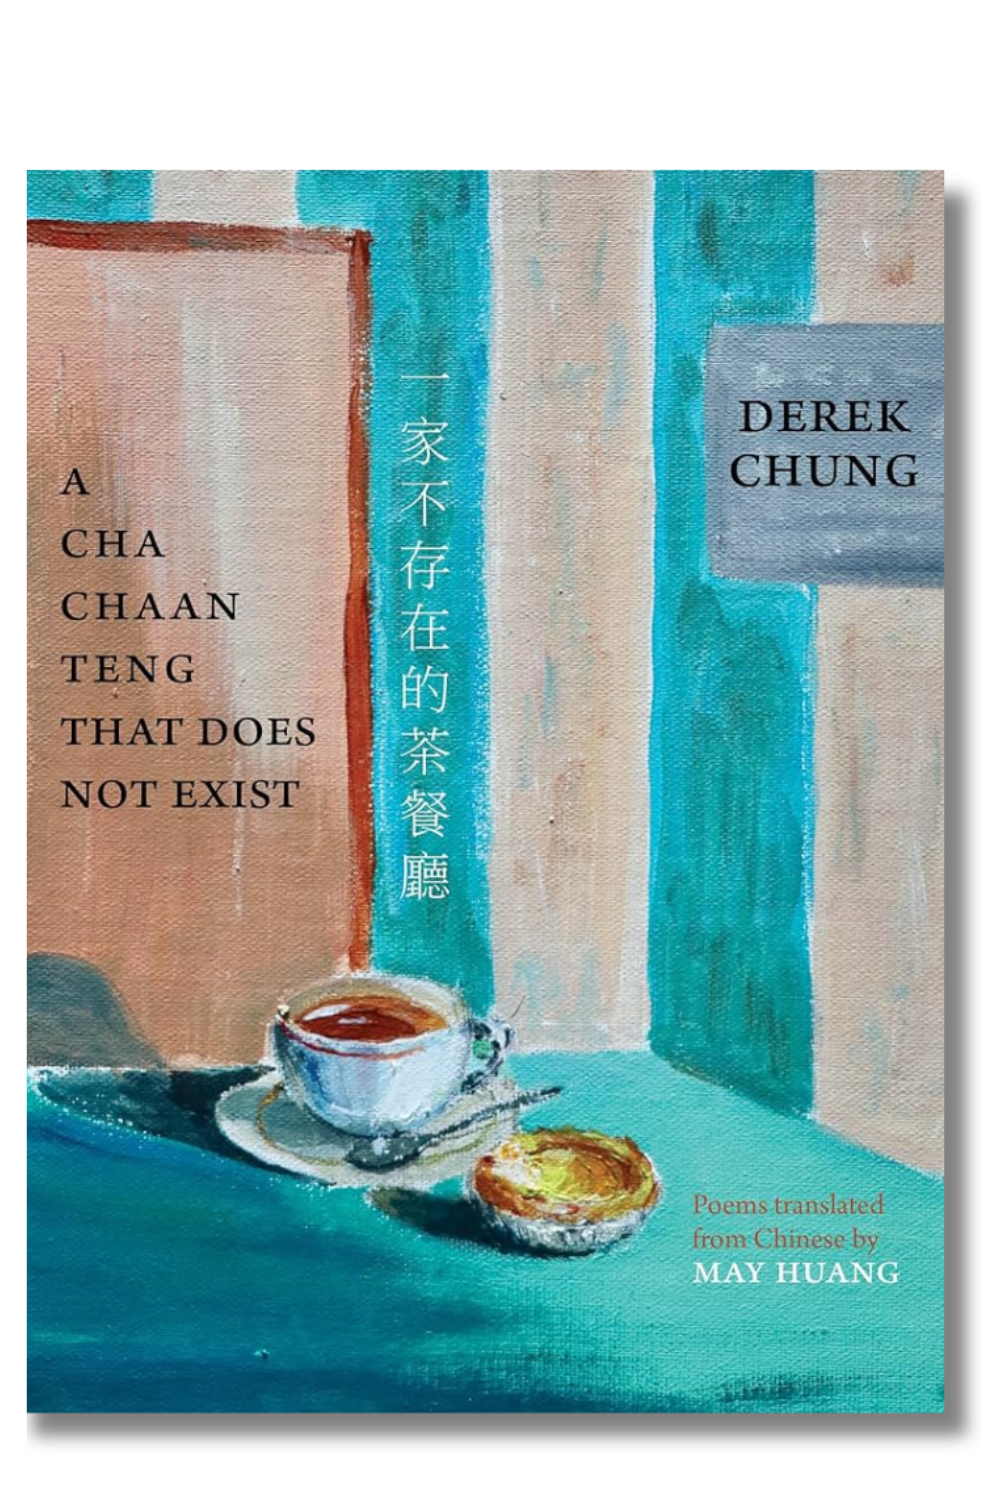 The cover of "A Cha Chaan Teng That Does Not Exist" by Derek Chung, translated by May Huang